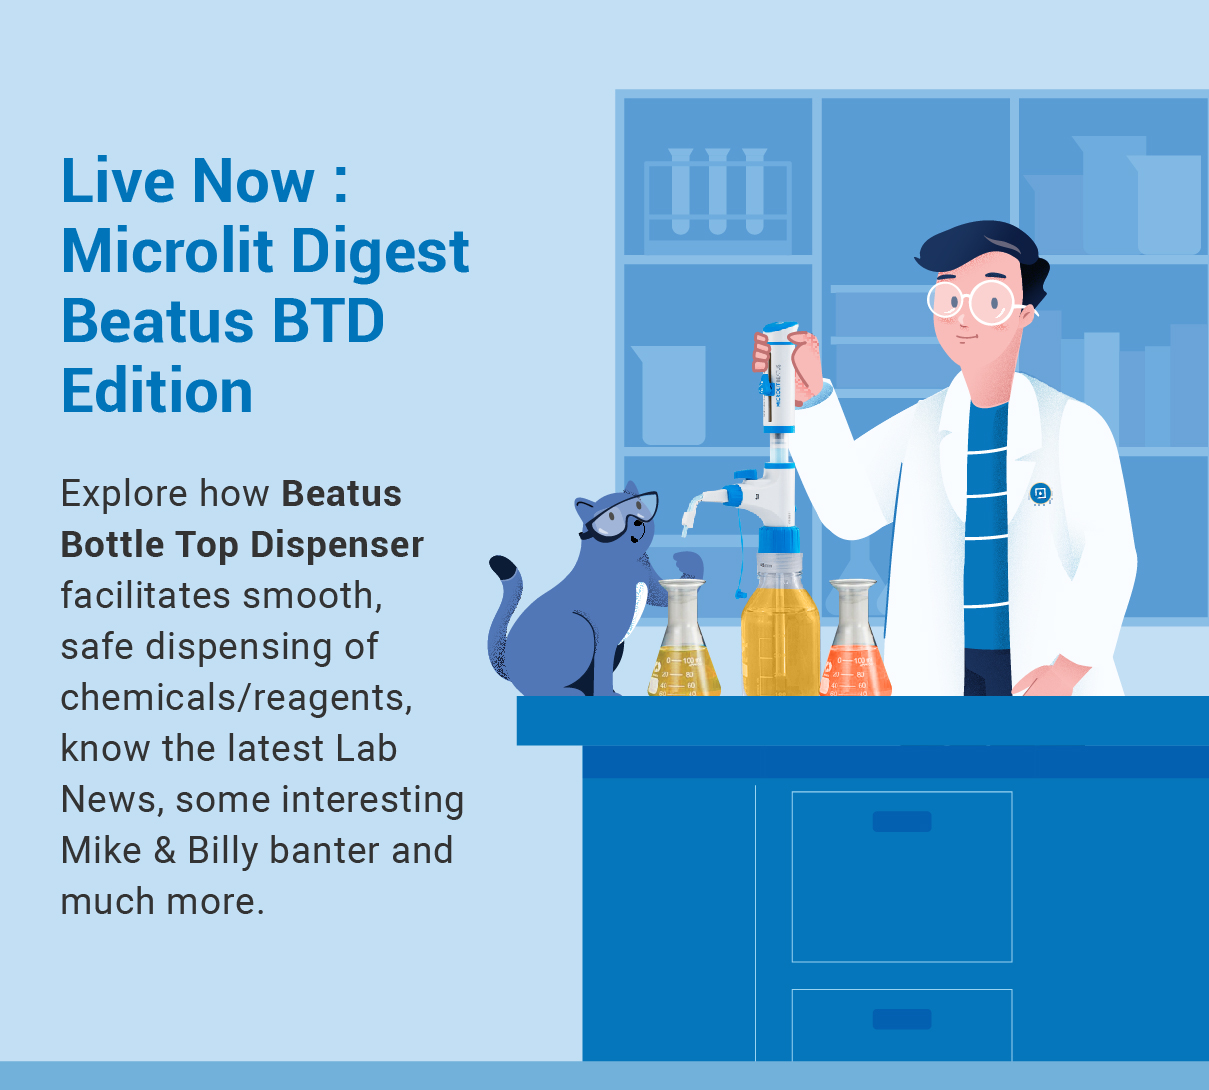 Say Hello to the Beatus BTD Edition of Microlit Digest!!!